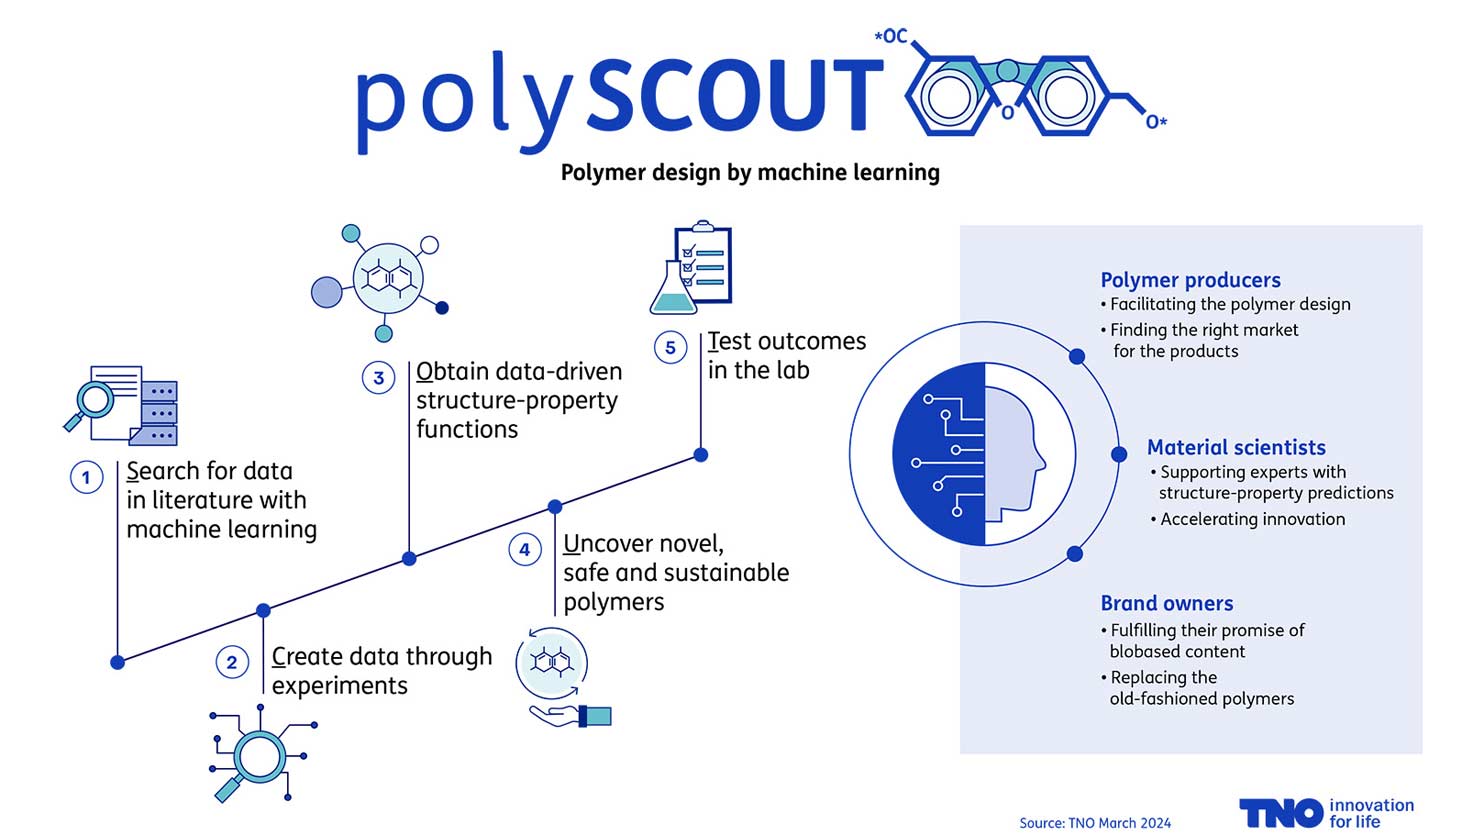 Display process for sustainable polymers with machine learning by project polyscout